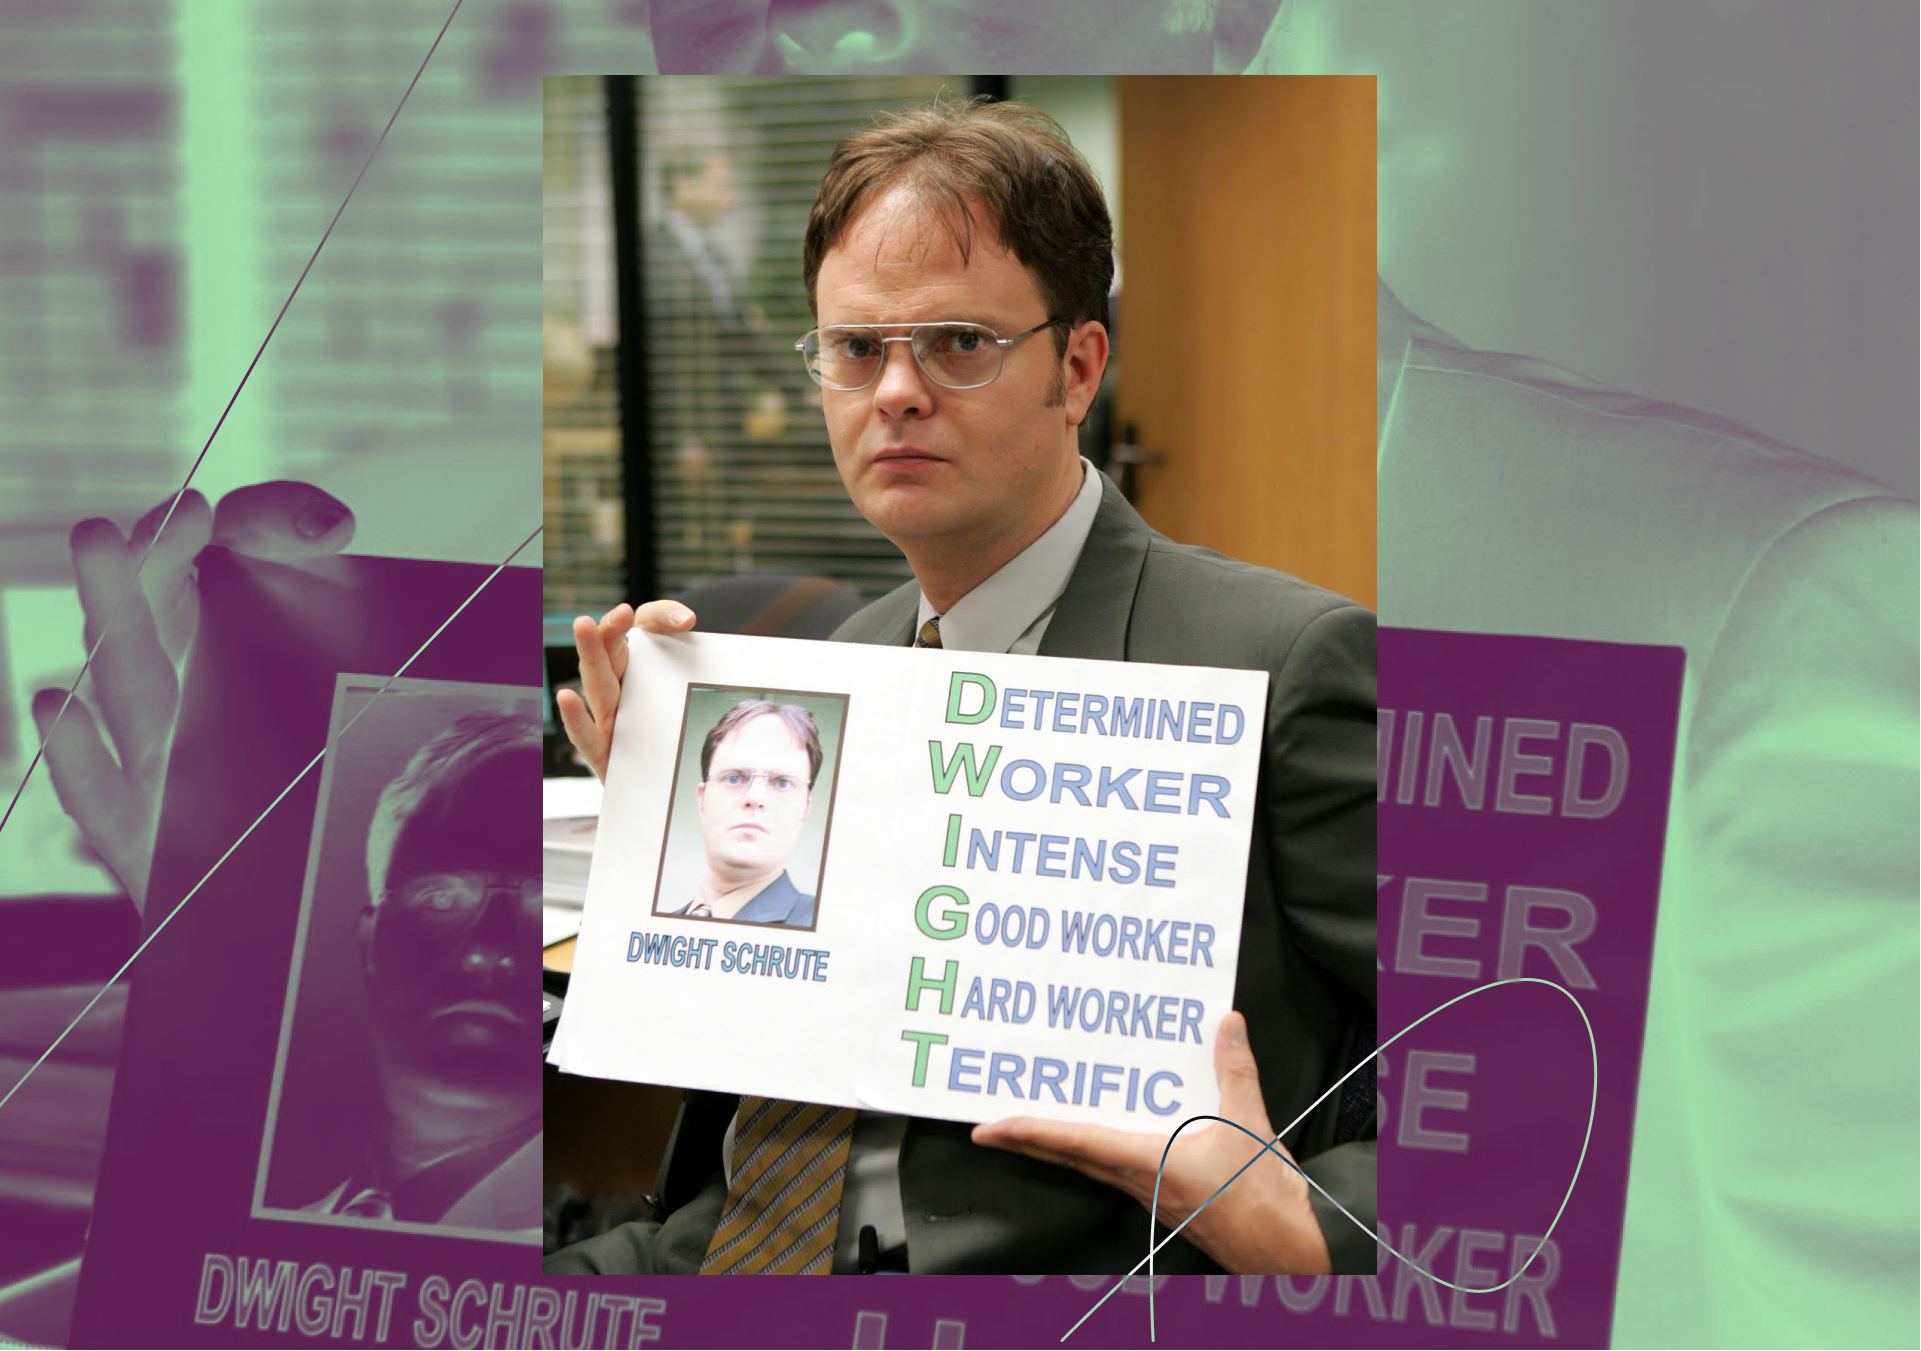 Dwight from tv show the office holding a sign that shows an acronym of his own name, determined, worker, intense, good worker, hard worker, terrific